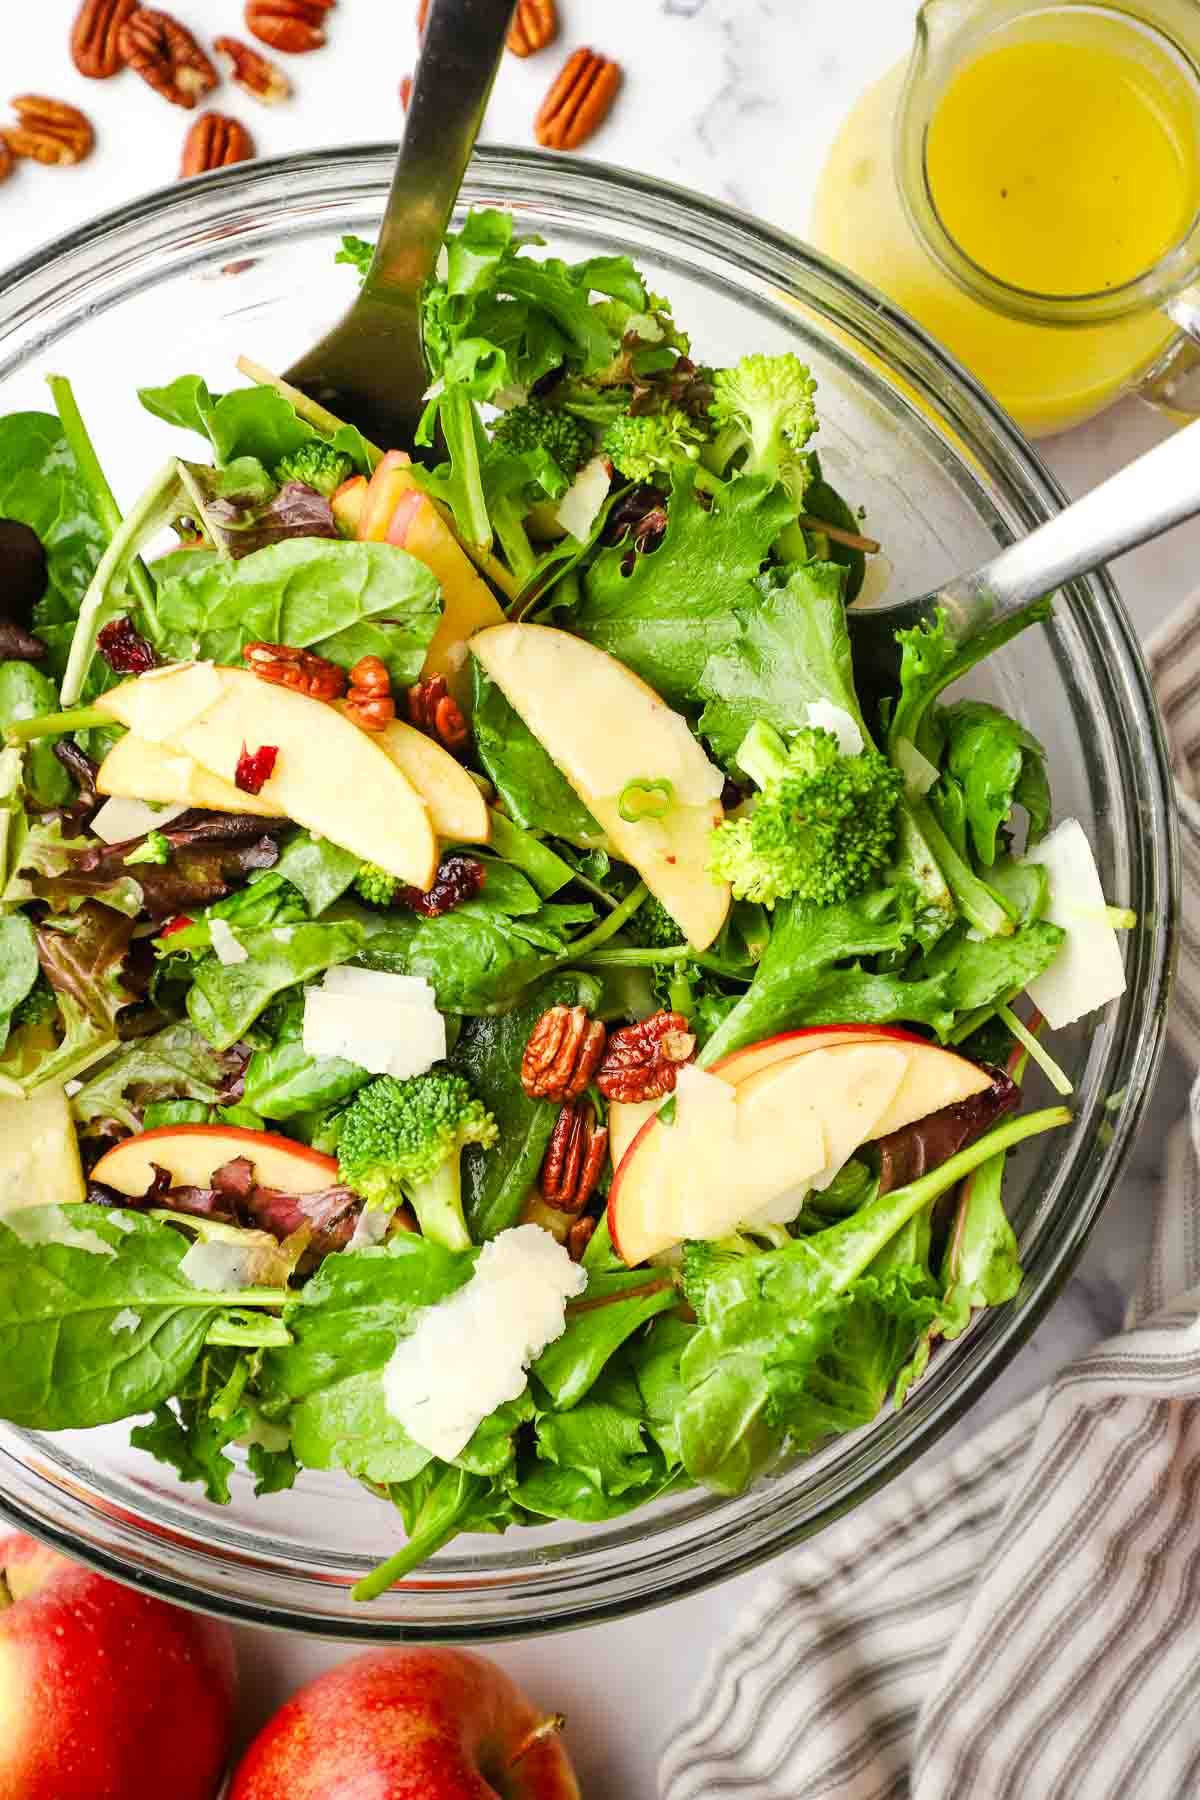 A mixing bowl full of tossed salad with serving utensils. A jar of vinaigrette and apples in the background.